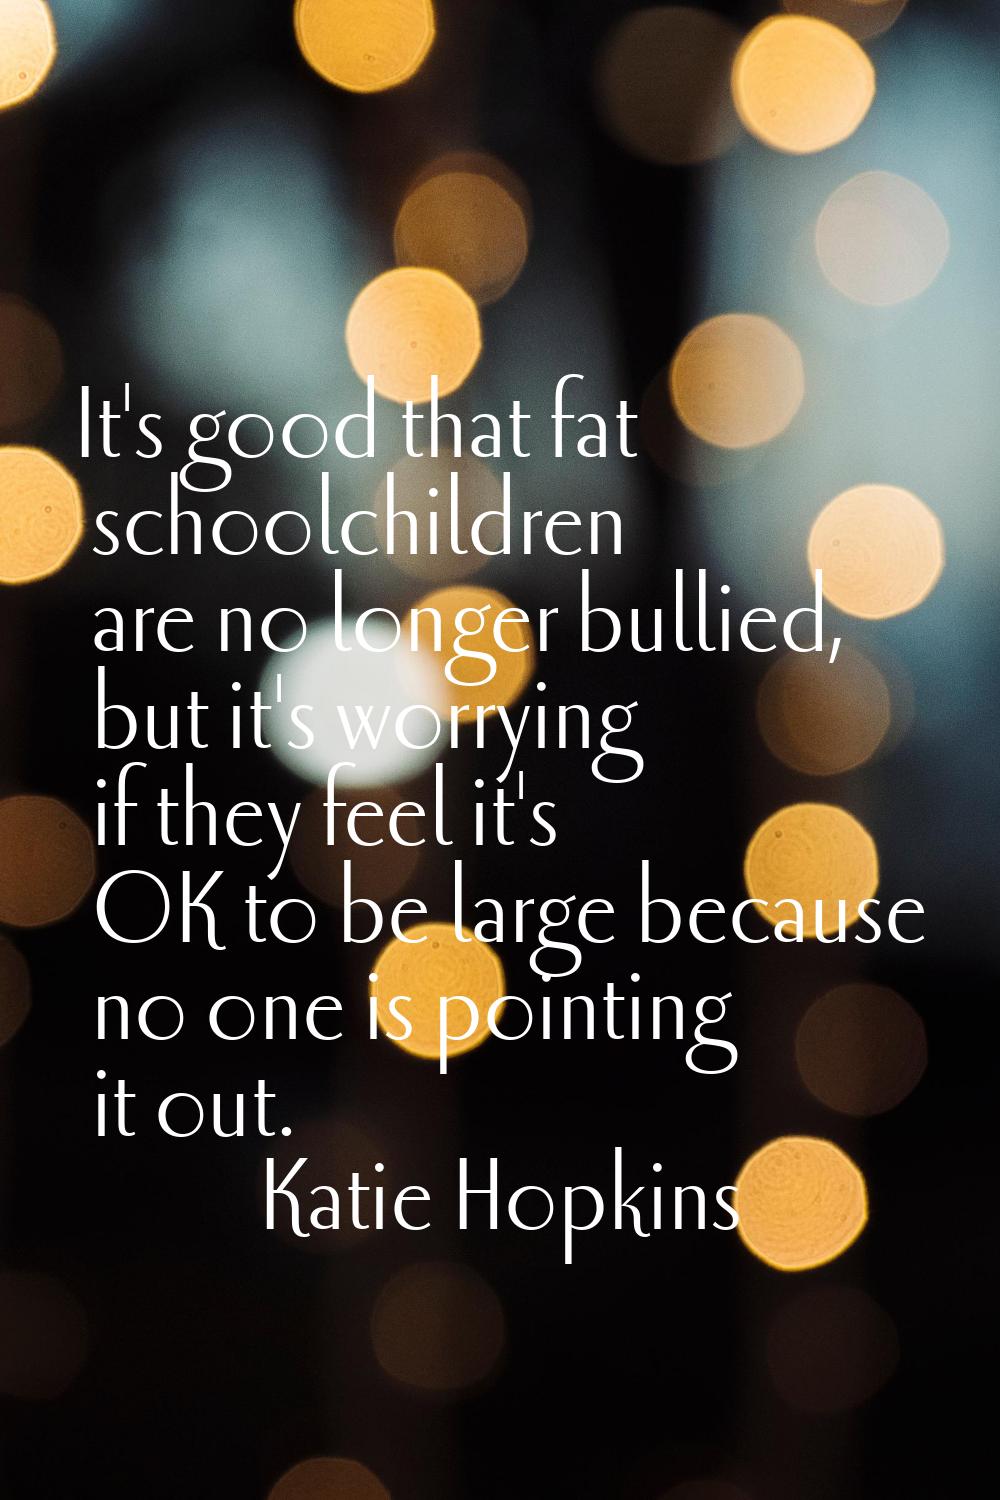 It's good that fat schoolchildren are no longer bullied, but it's worrying if they feel it's OK to 